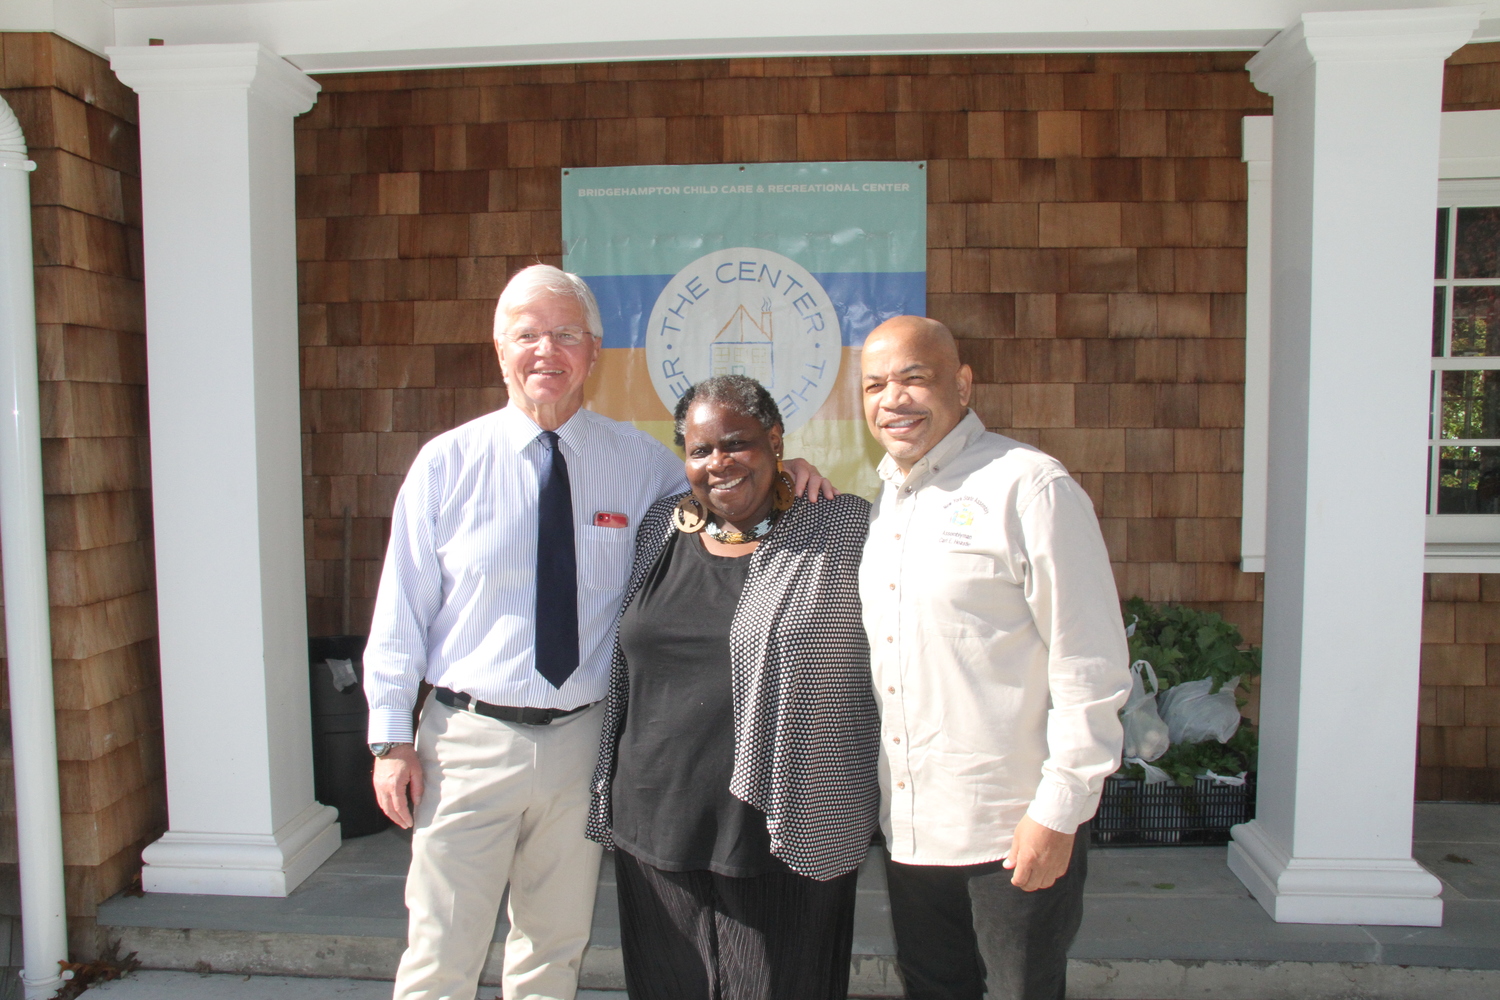 Assemblyman Fred Thiele, BCC Director Bonnie Cannon and Assembly Speaker Carl Heastie